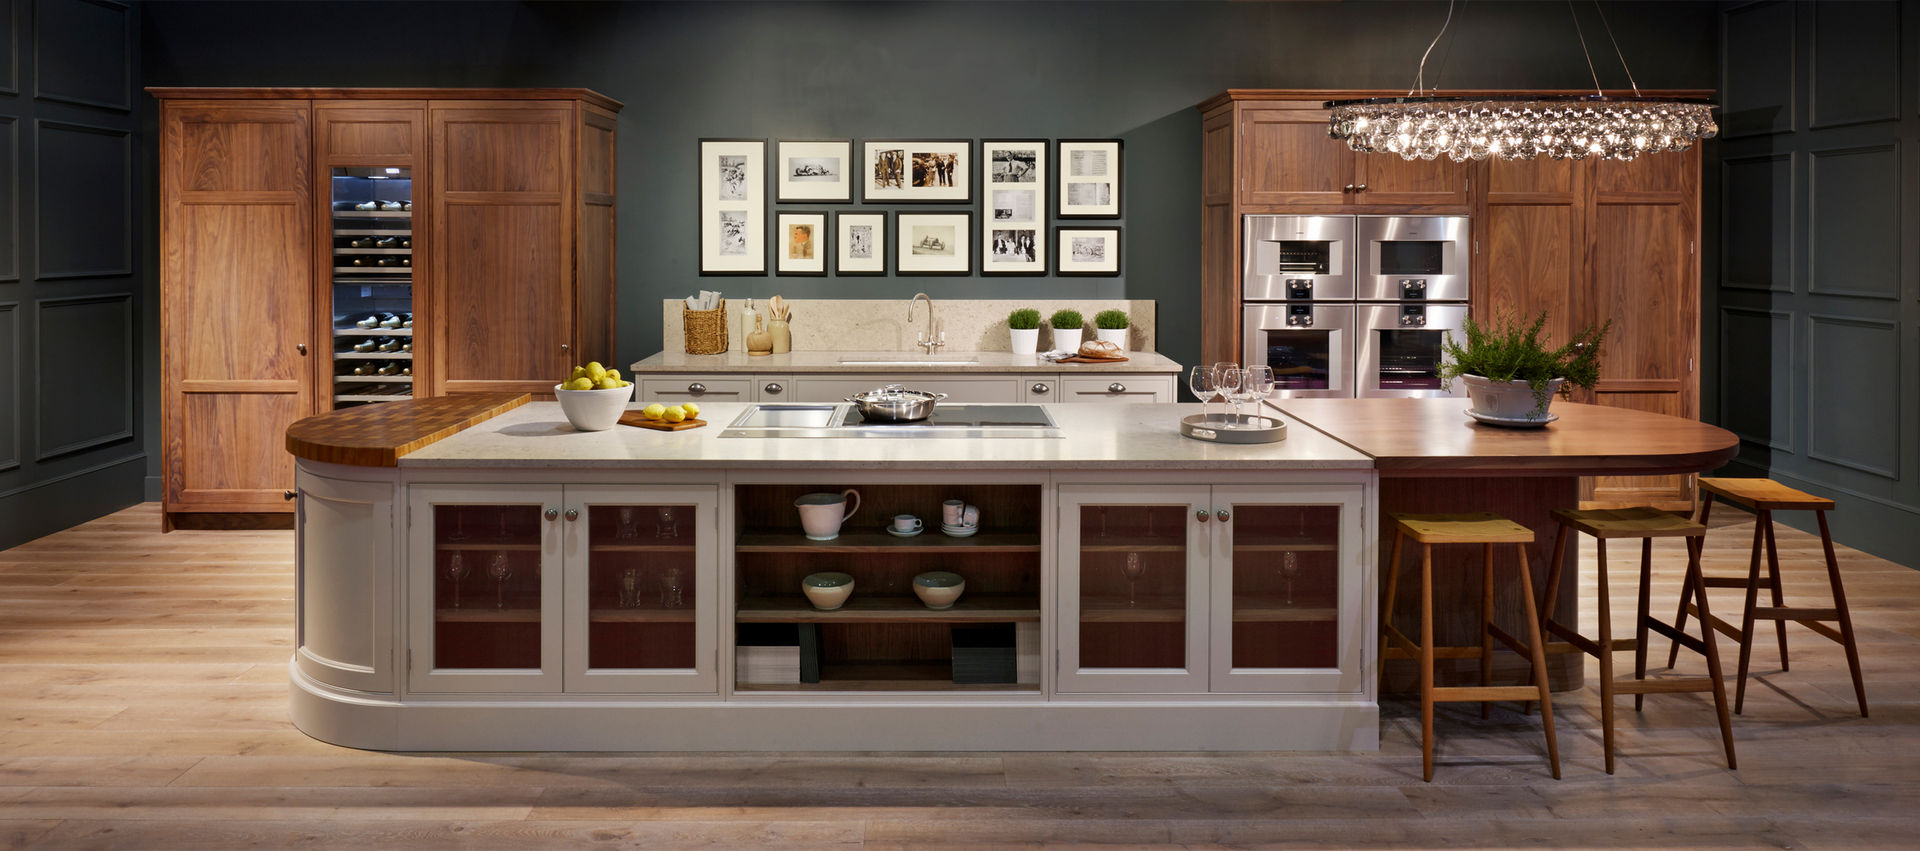 9 Elements to Use When Designing a Farmhouse Kitchen